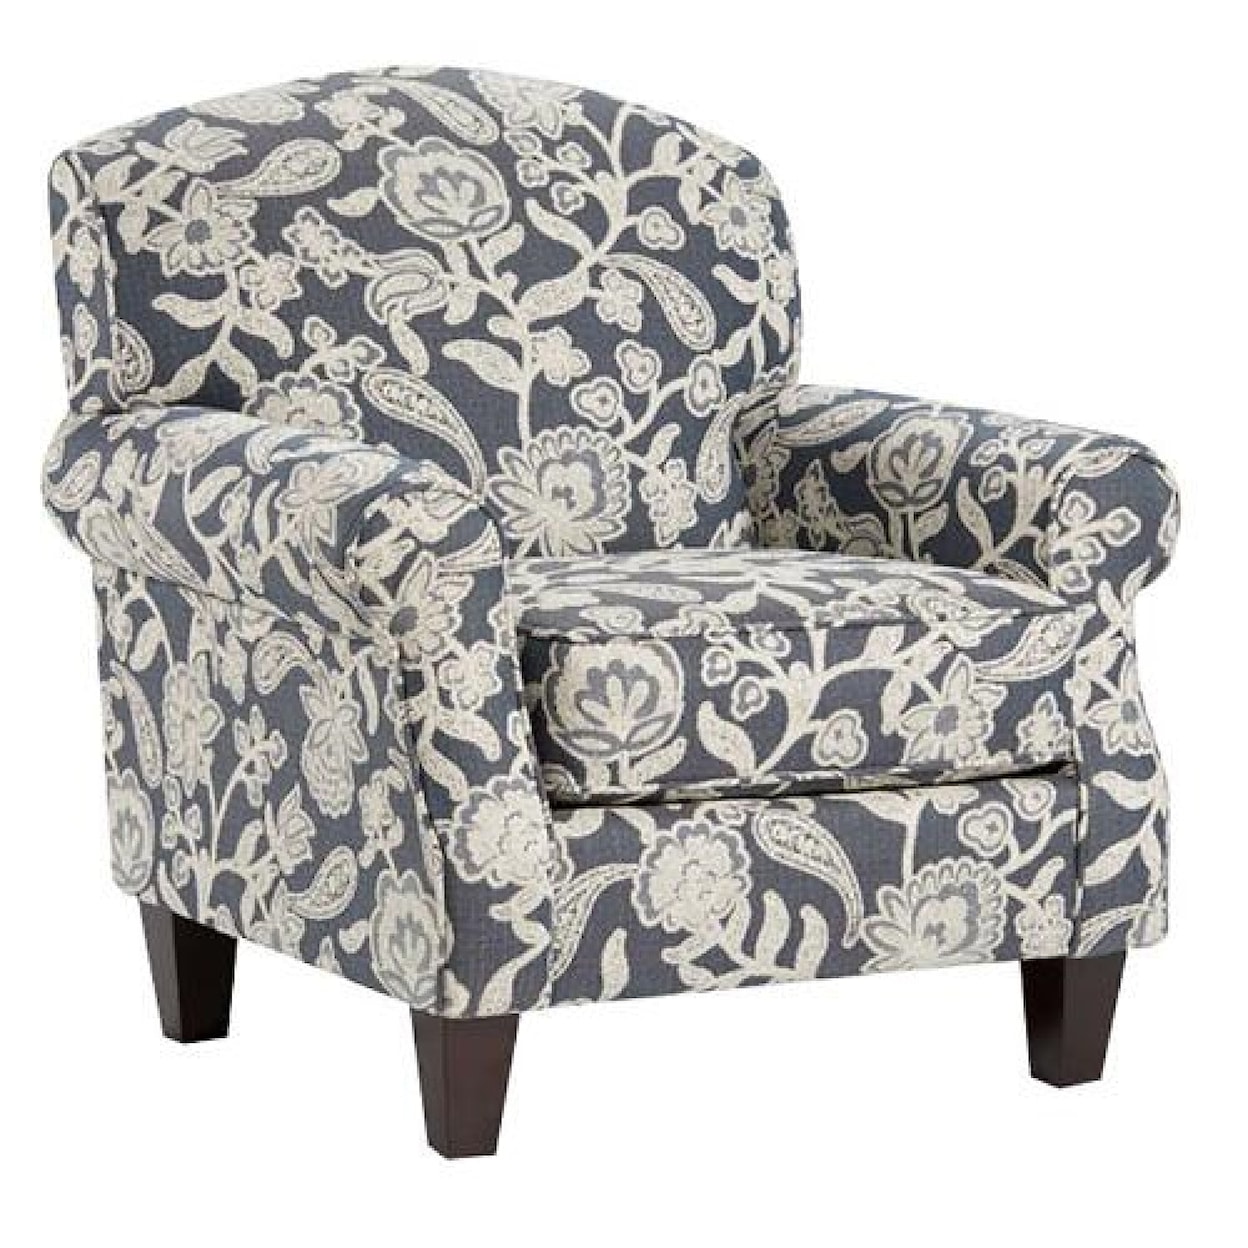 VFM Signature 39-00KP AWESOME OATMEAL (REV) Accent Chair